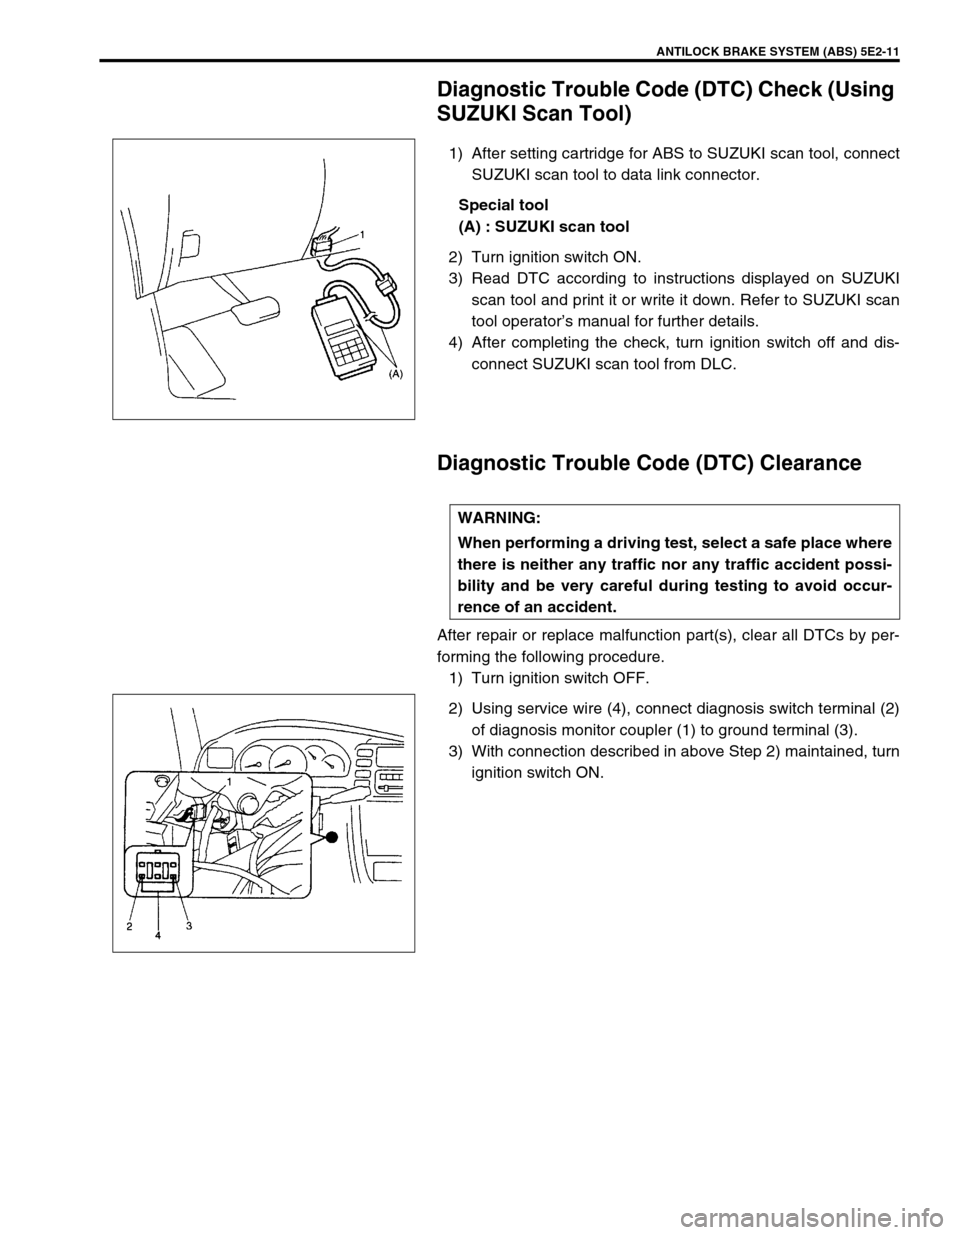 SUZUKI GRAND VITARA 2001 2.G Owners Guide ANTILOCK BRAKE SYSTEM (ABS) 5E2-11
Diagnostic Trouble Code (DTC) Check (Using 
SUZUKI Scan Tool)
1) After setting cartridge for ABS to SUZUKI scan tool, connect
SUZUKI scan tool to data link connector